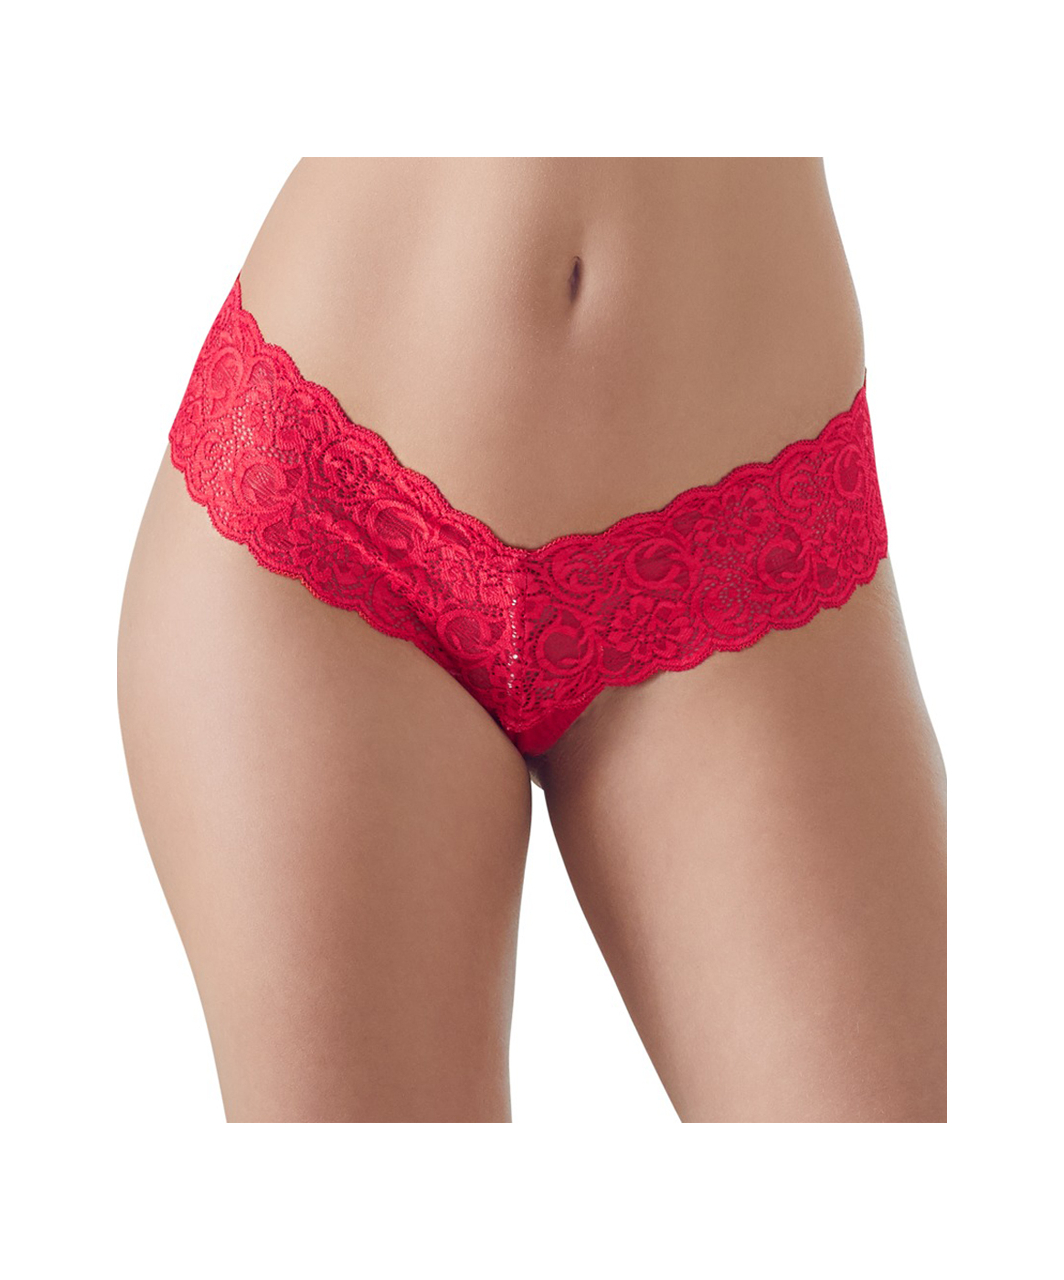 Cottelli Lingerie red lace string with pearls